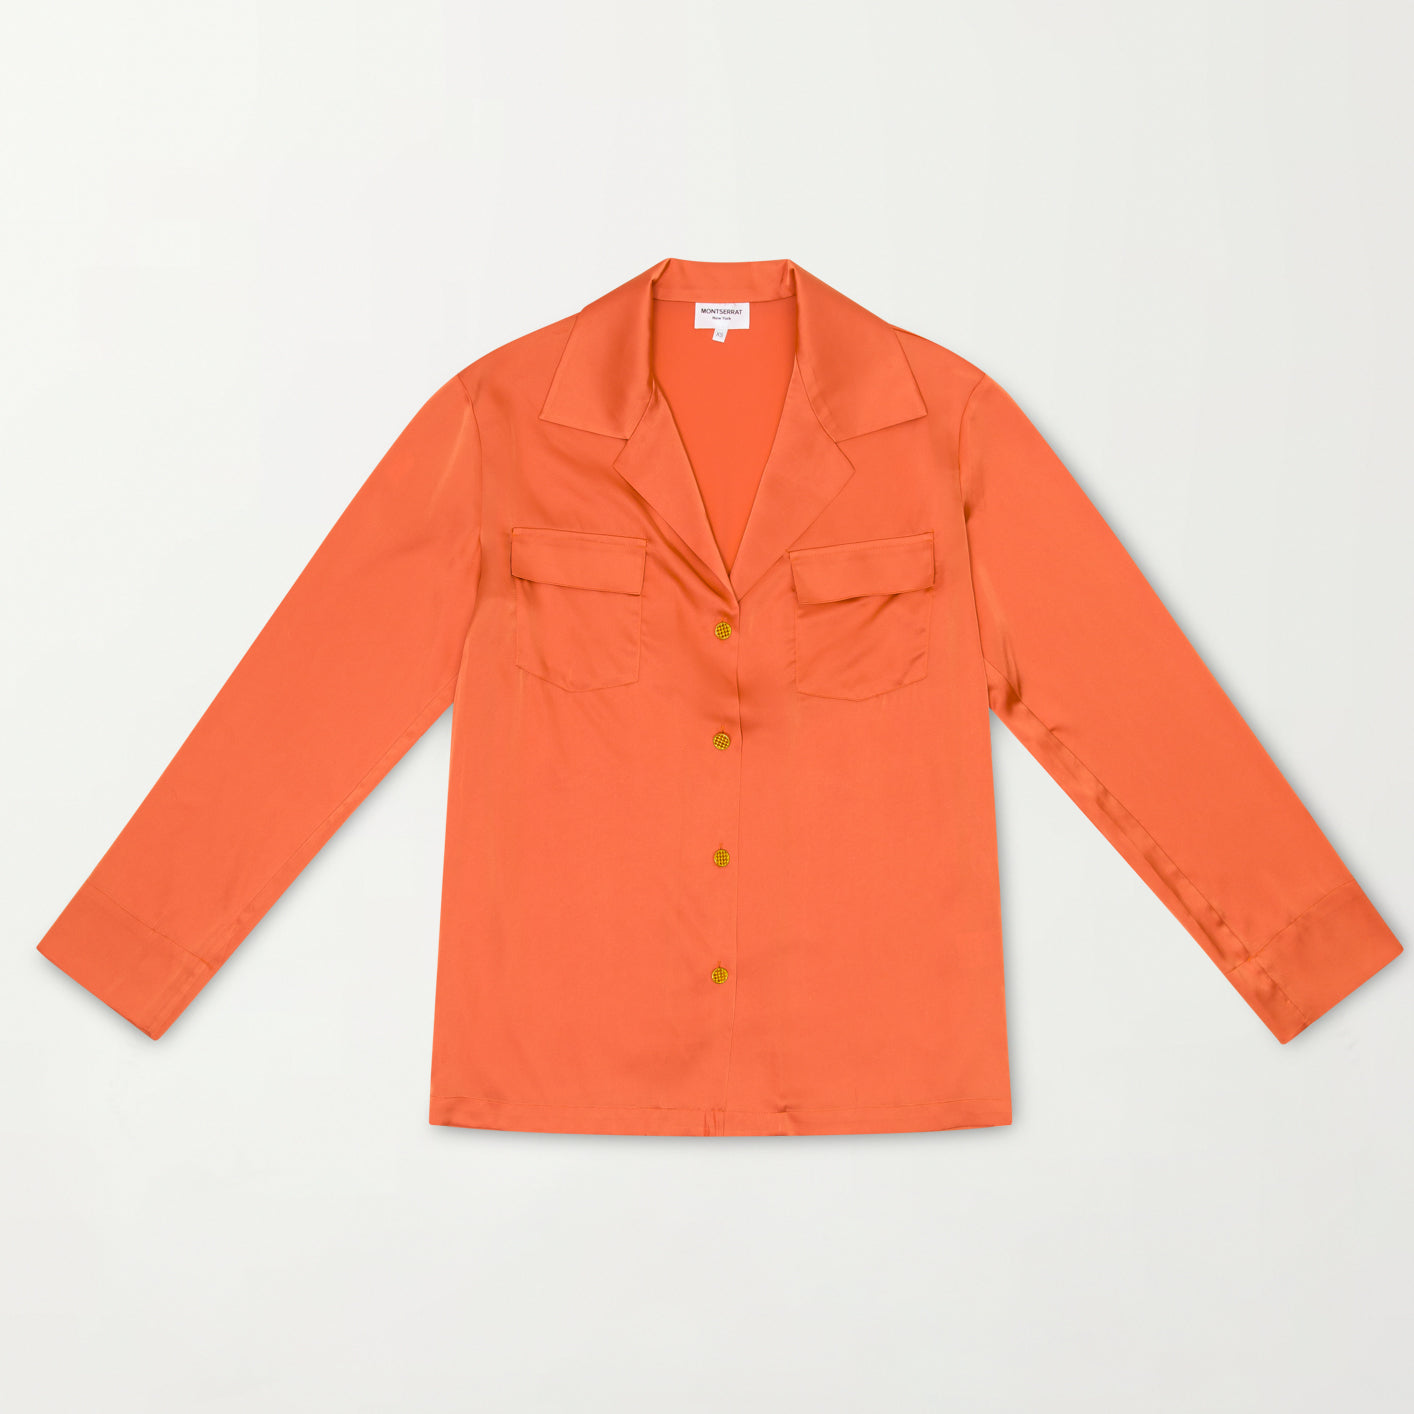 The Jet Set Top in Apricot